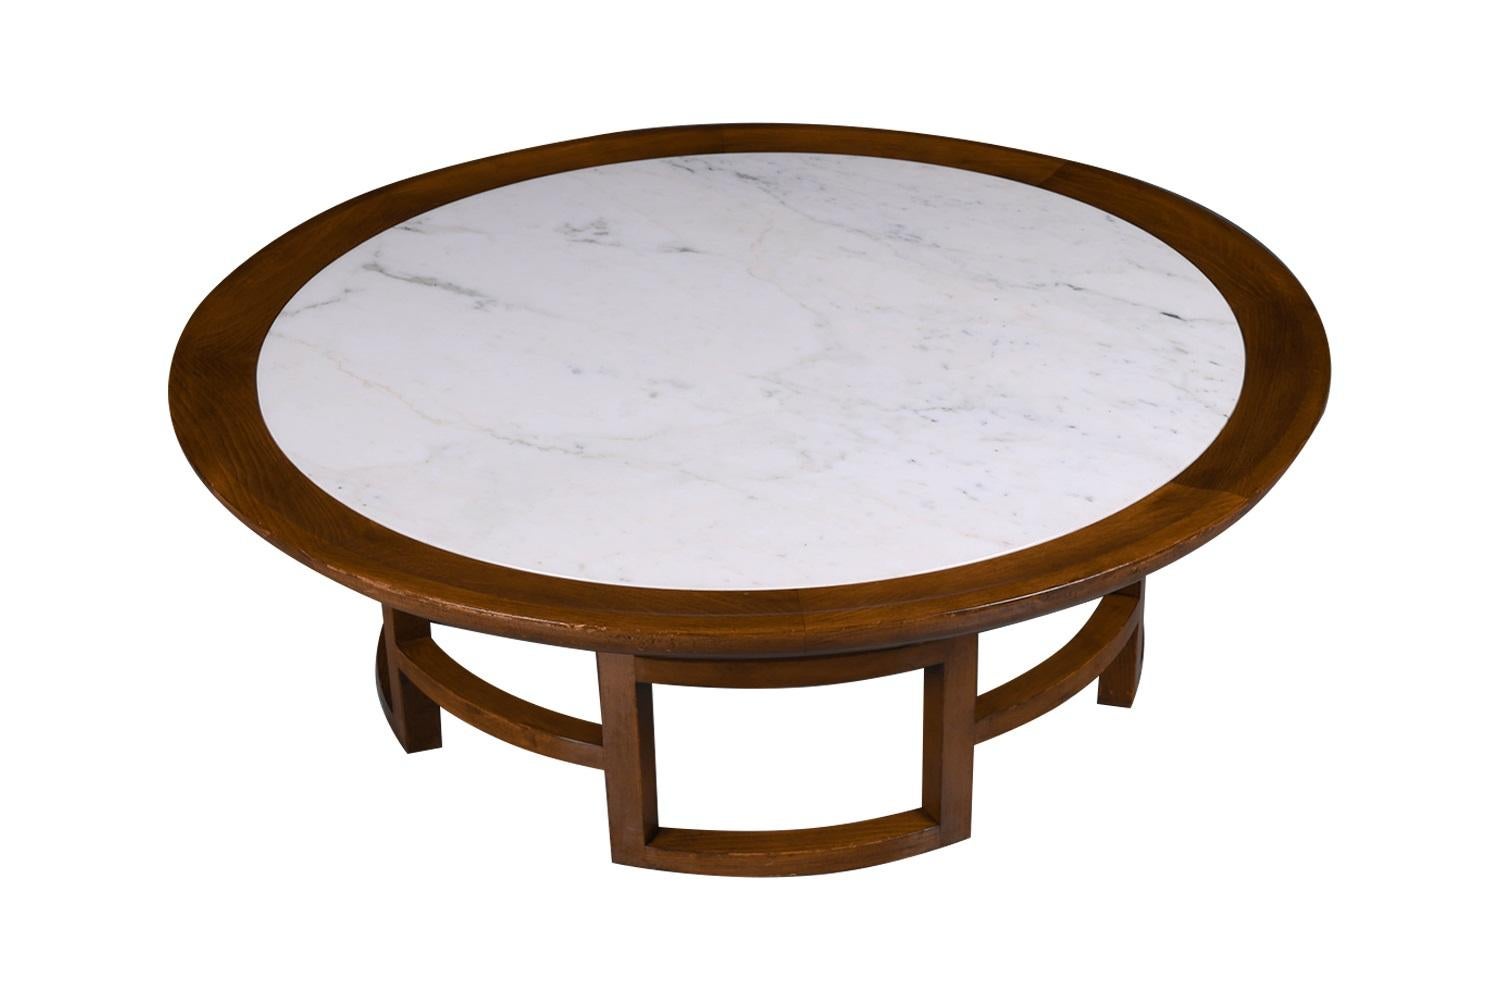 Mid-20th Century Vintage Marble Round Coffee Table James Mont Style